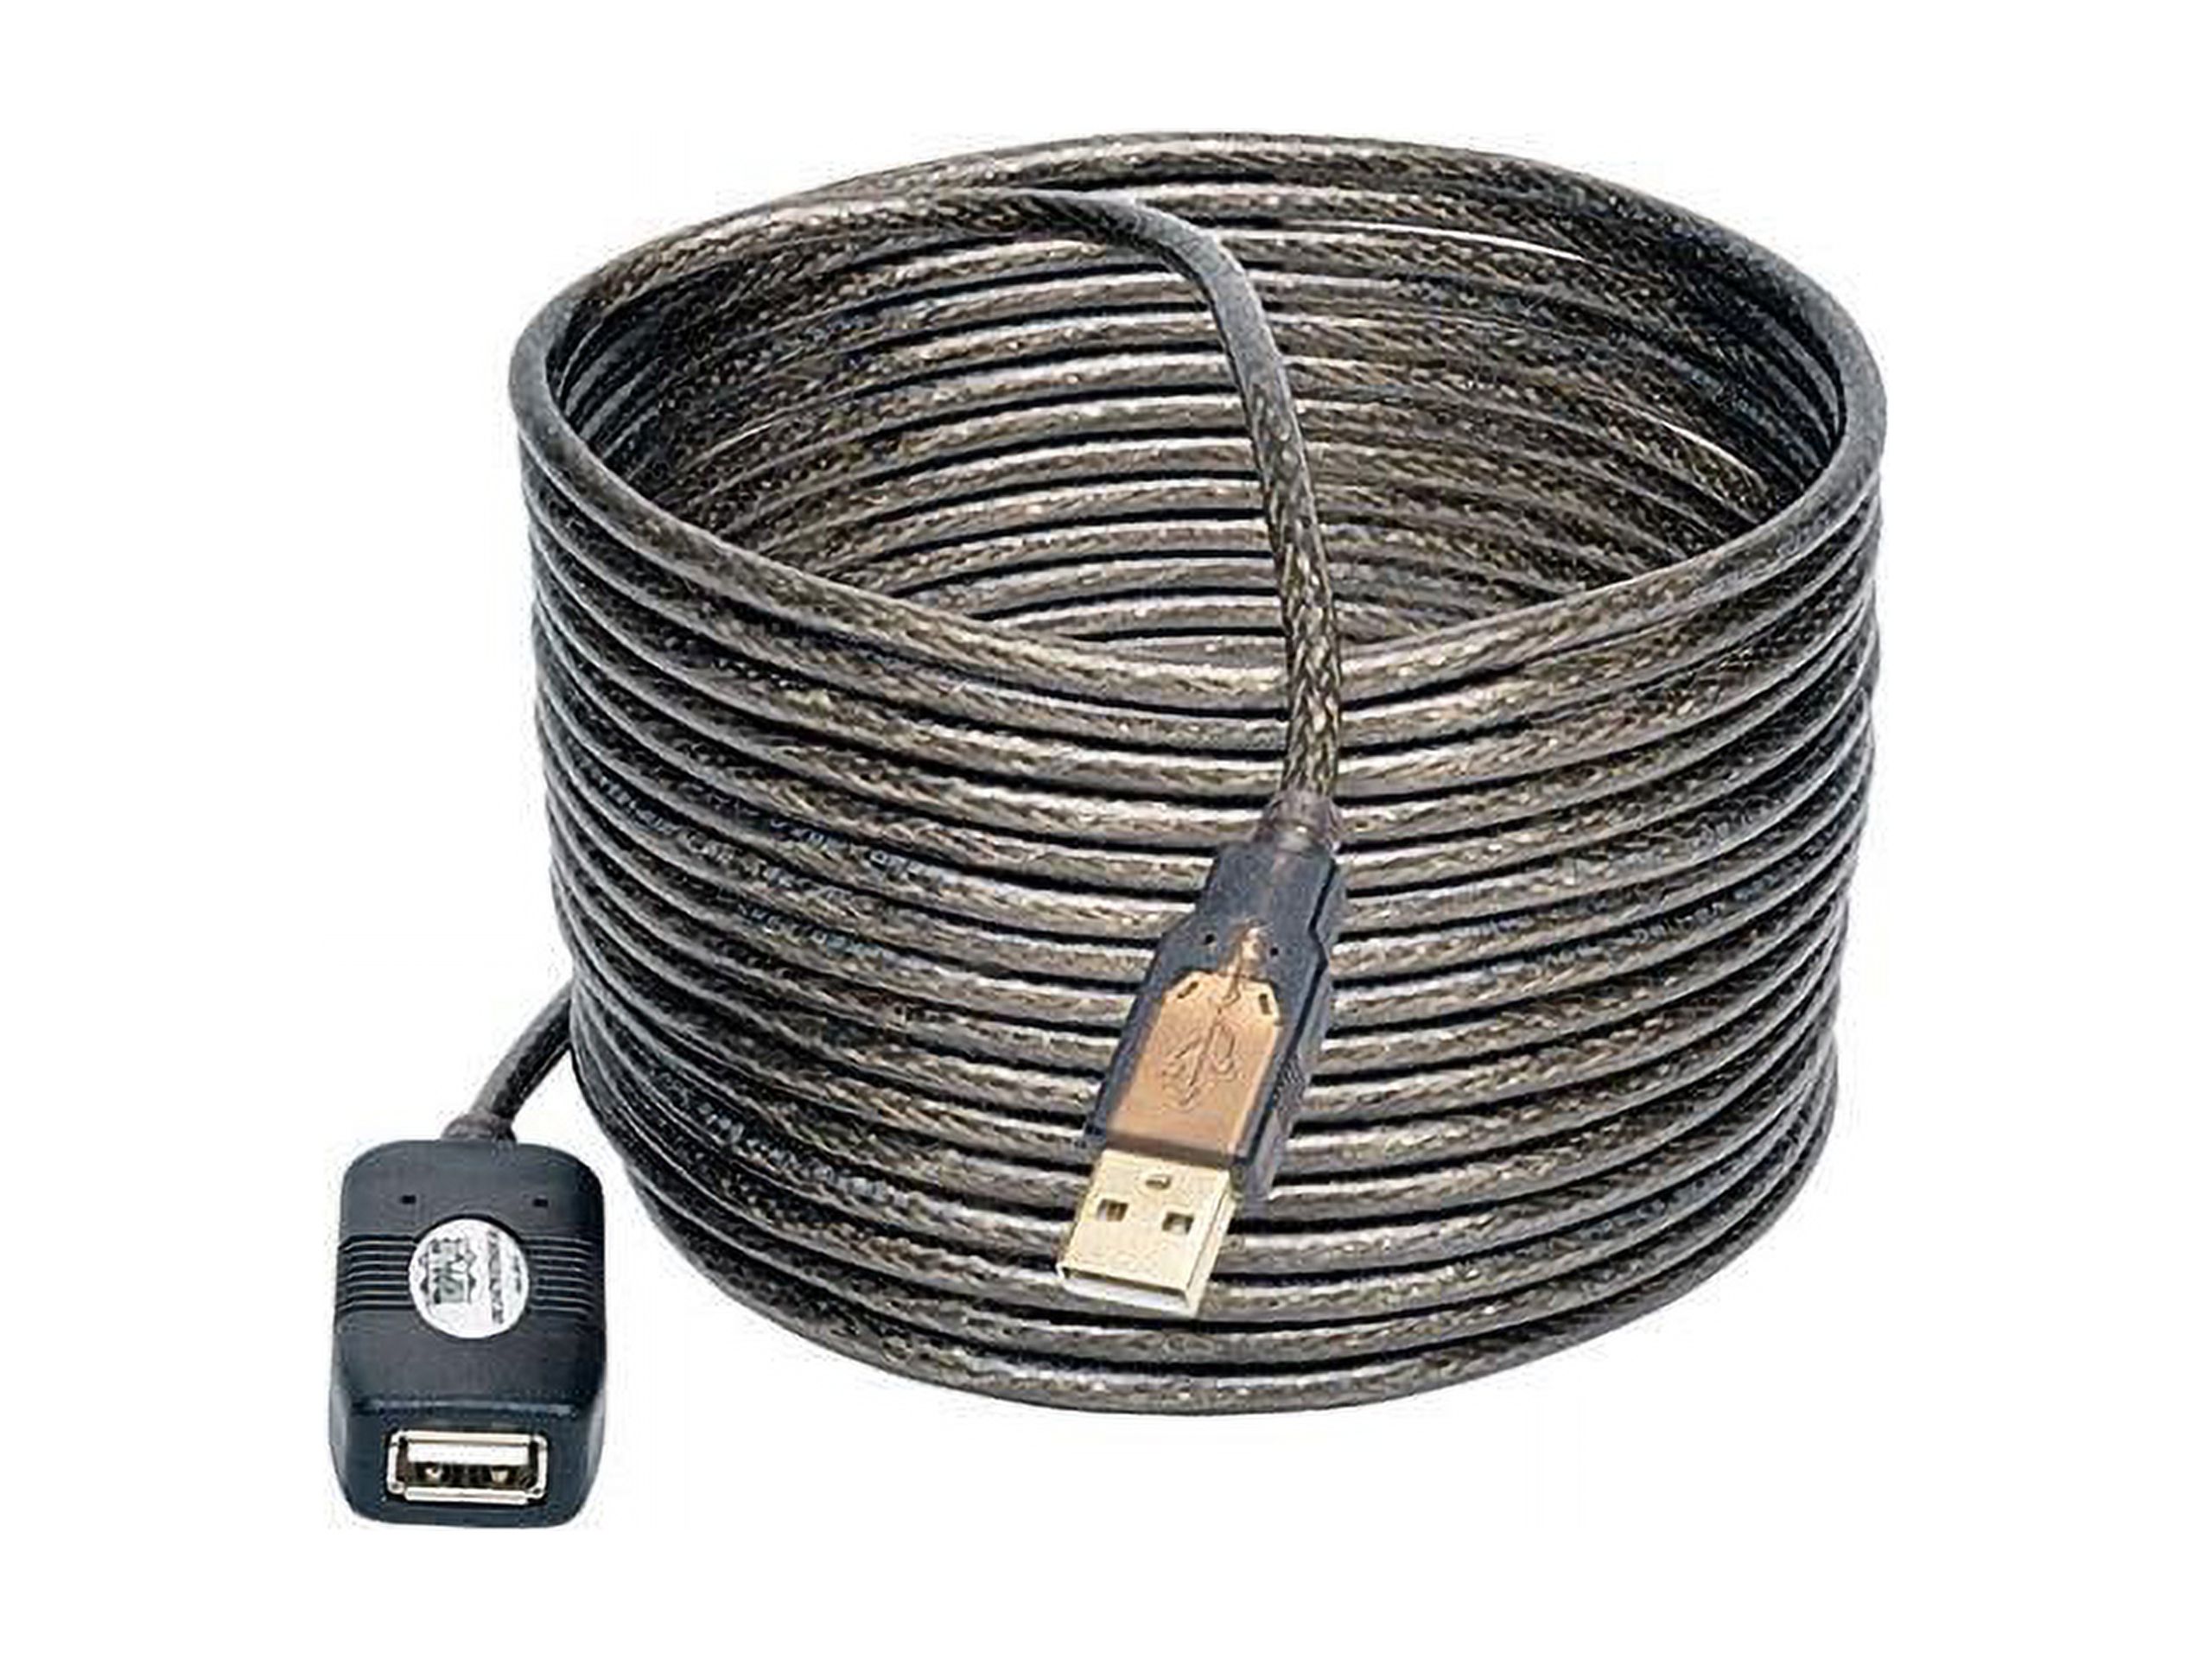 "Tripp Lite USB Active Extension Cable, USB 2.0 A Male to A Female Cable, High Speed, 16 ft. (U026-016)" - image 2 of 2